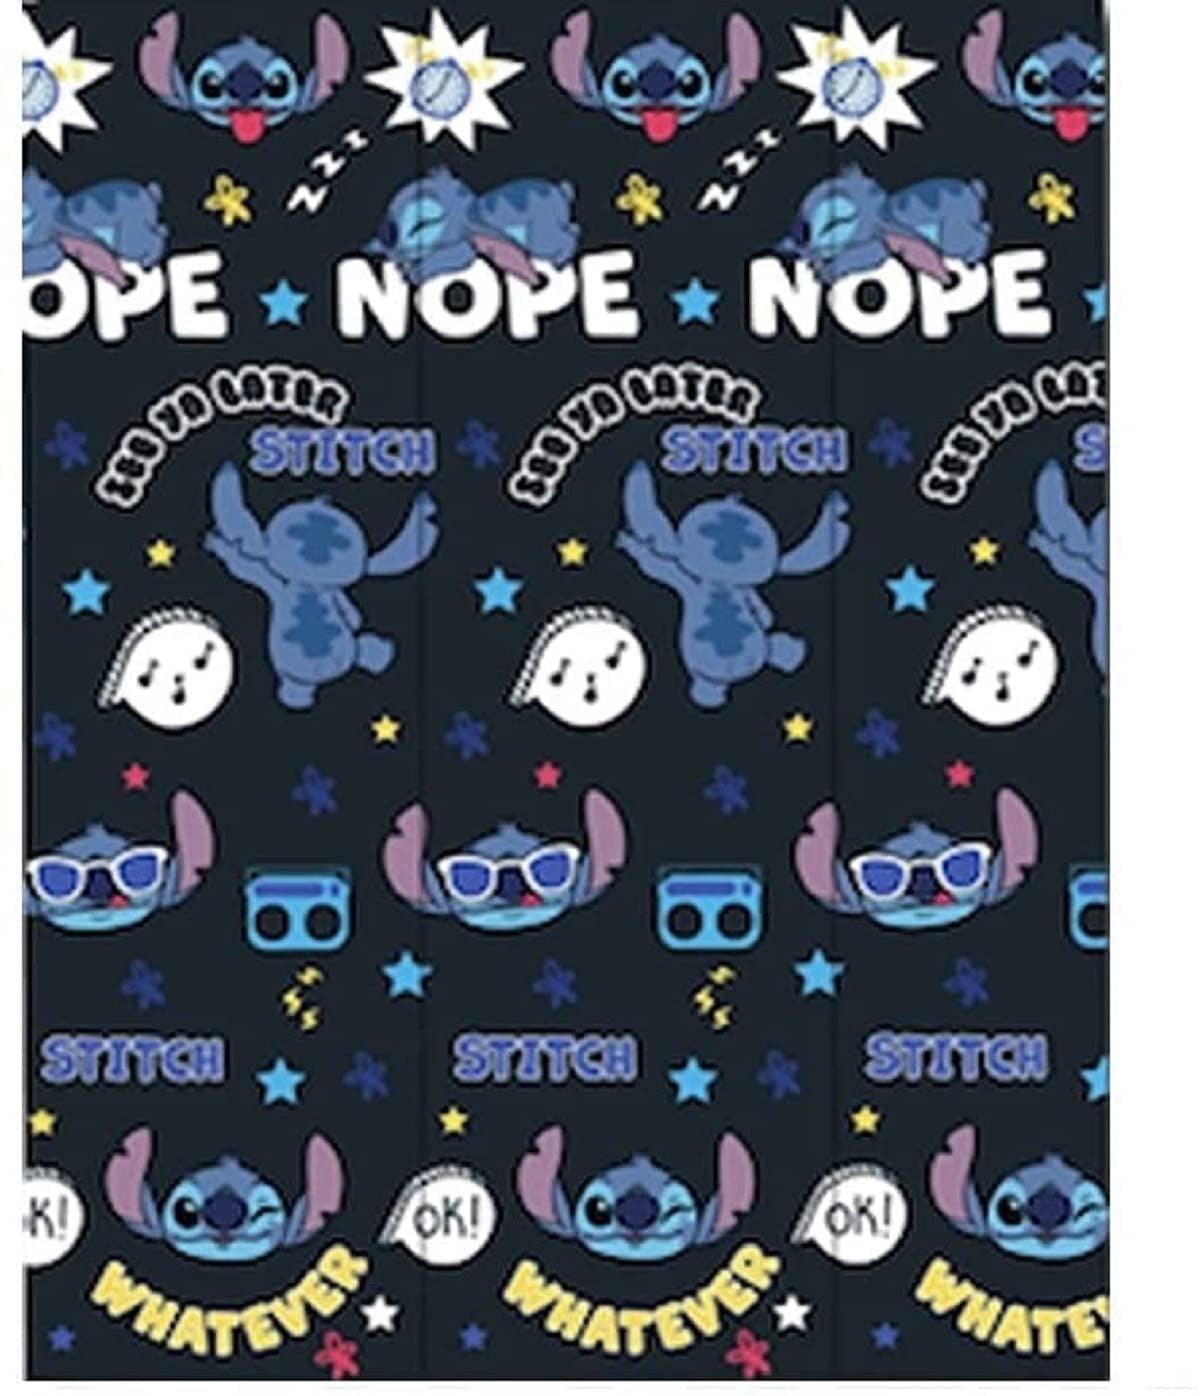 Disney Stitch Throw Blanket 45" x 60" Cool See You Later Nope